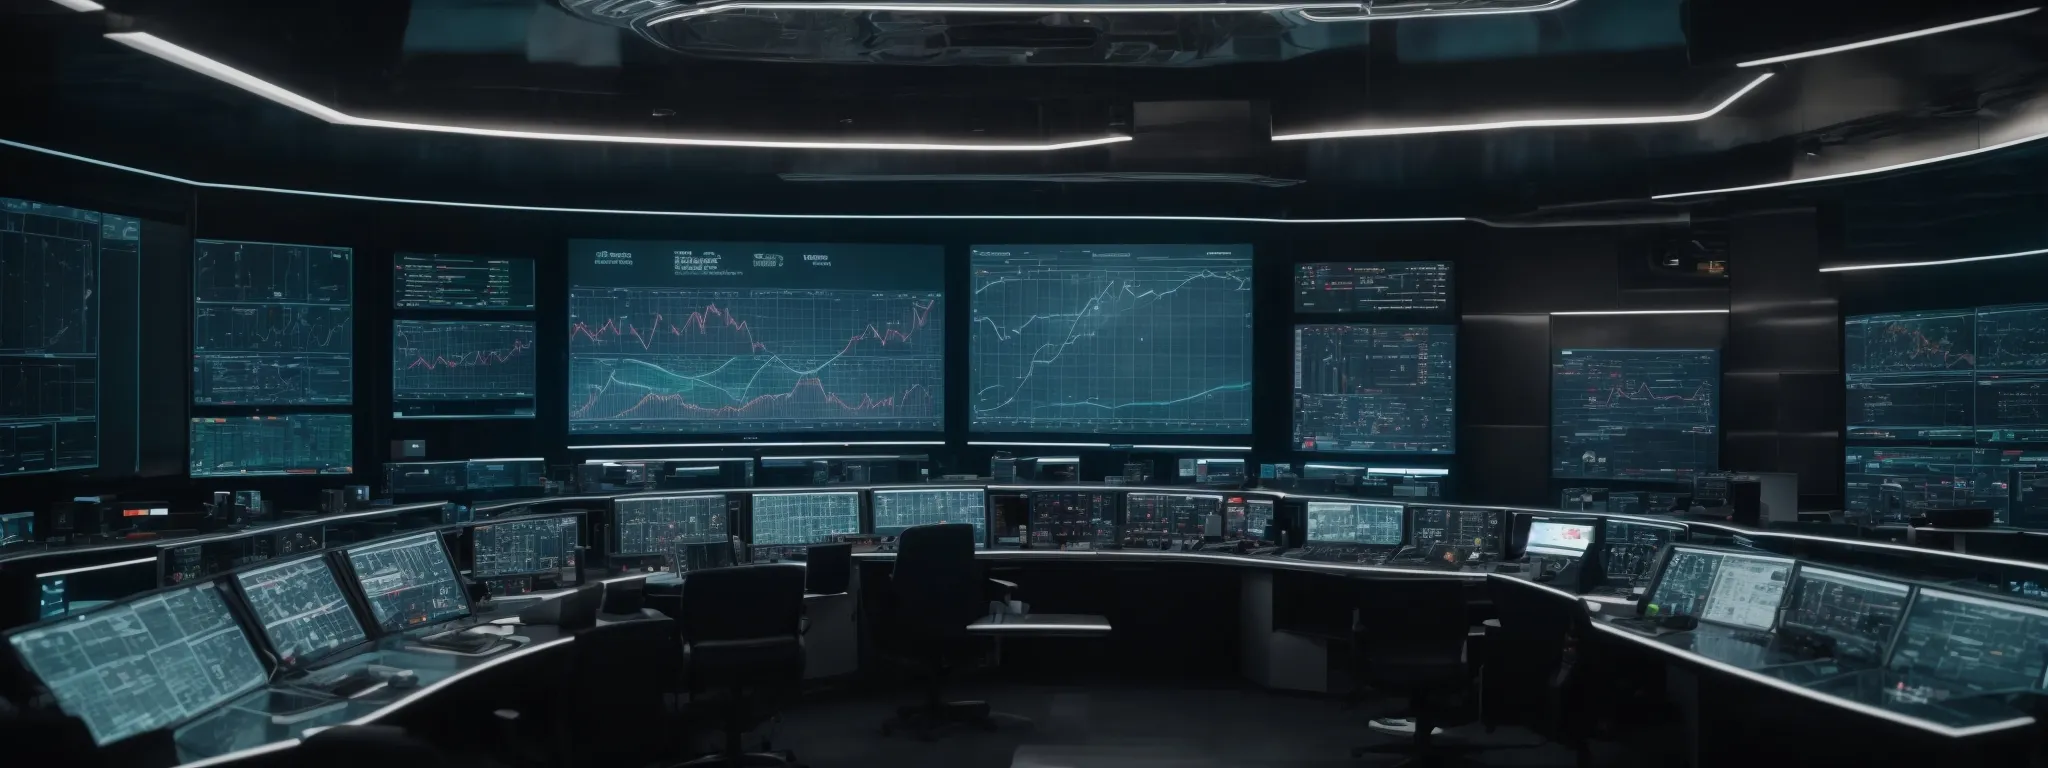 a futuristic control room with large screens displaying complex data analysis graphs and a central ai interface mapping out search engine strategies.